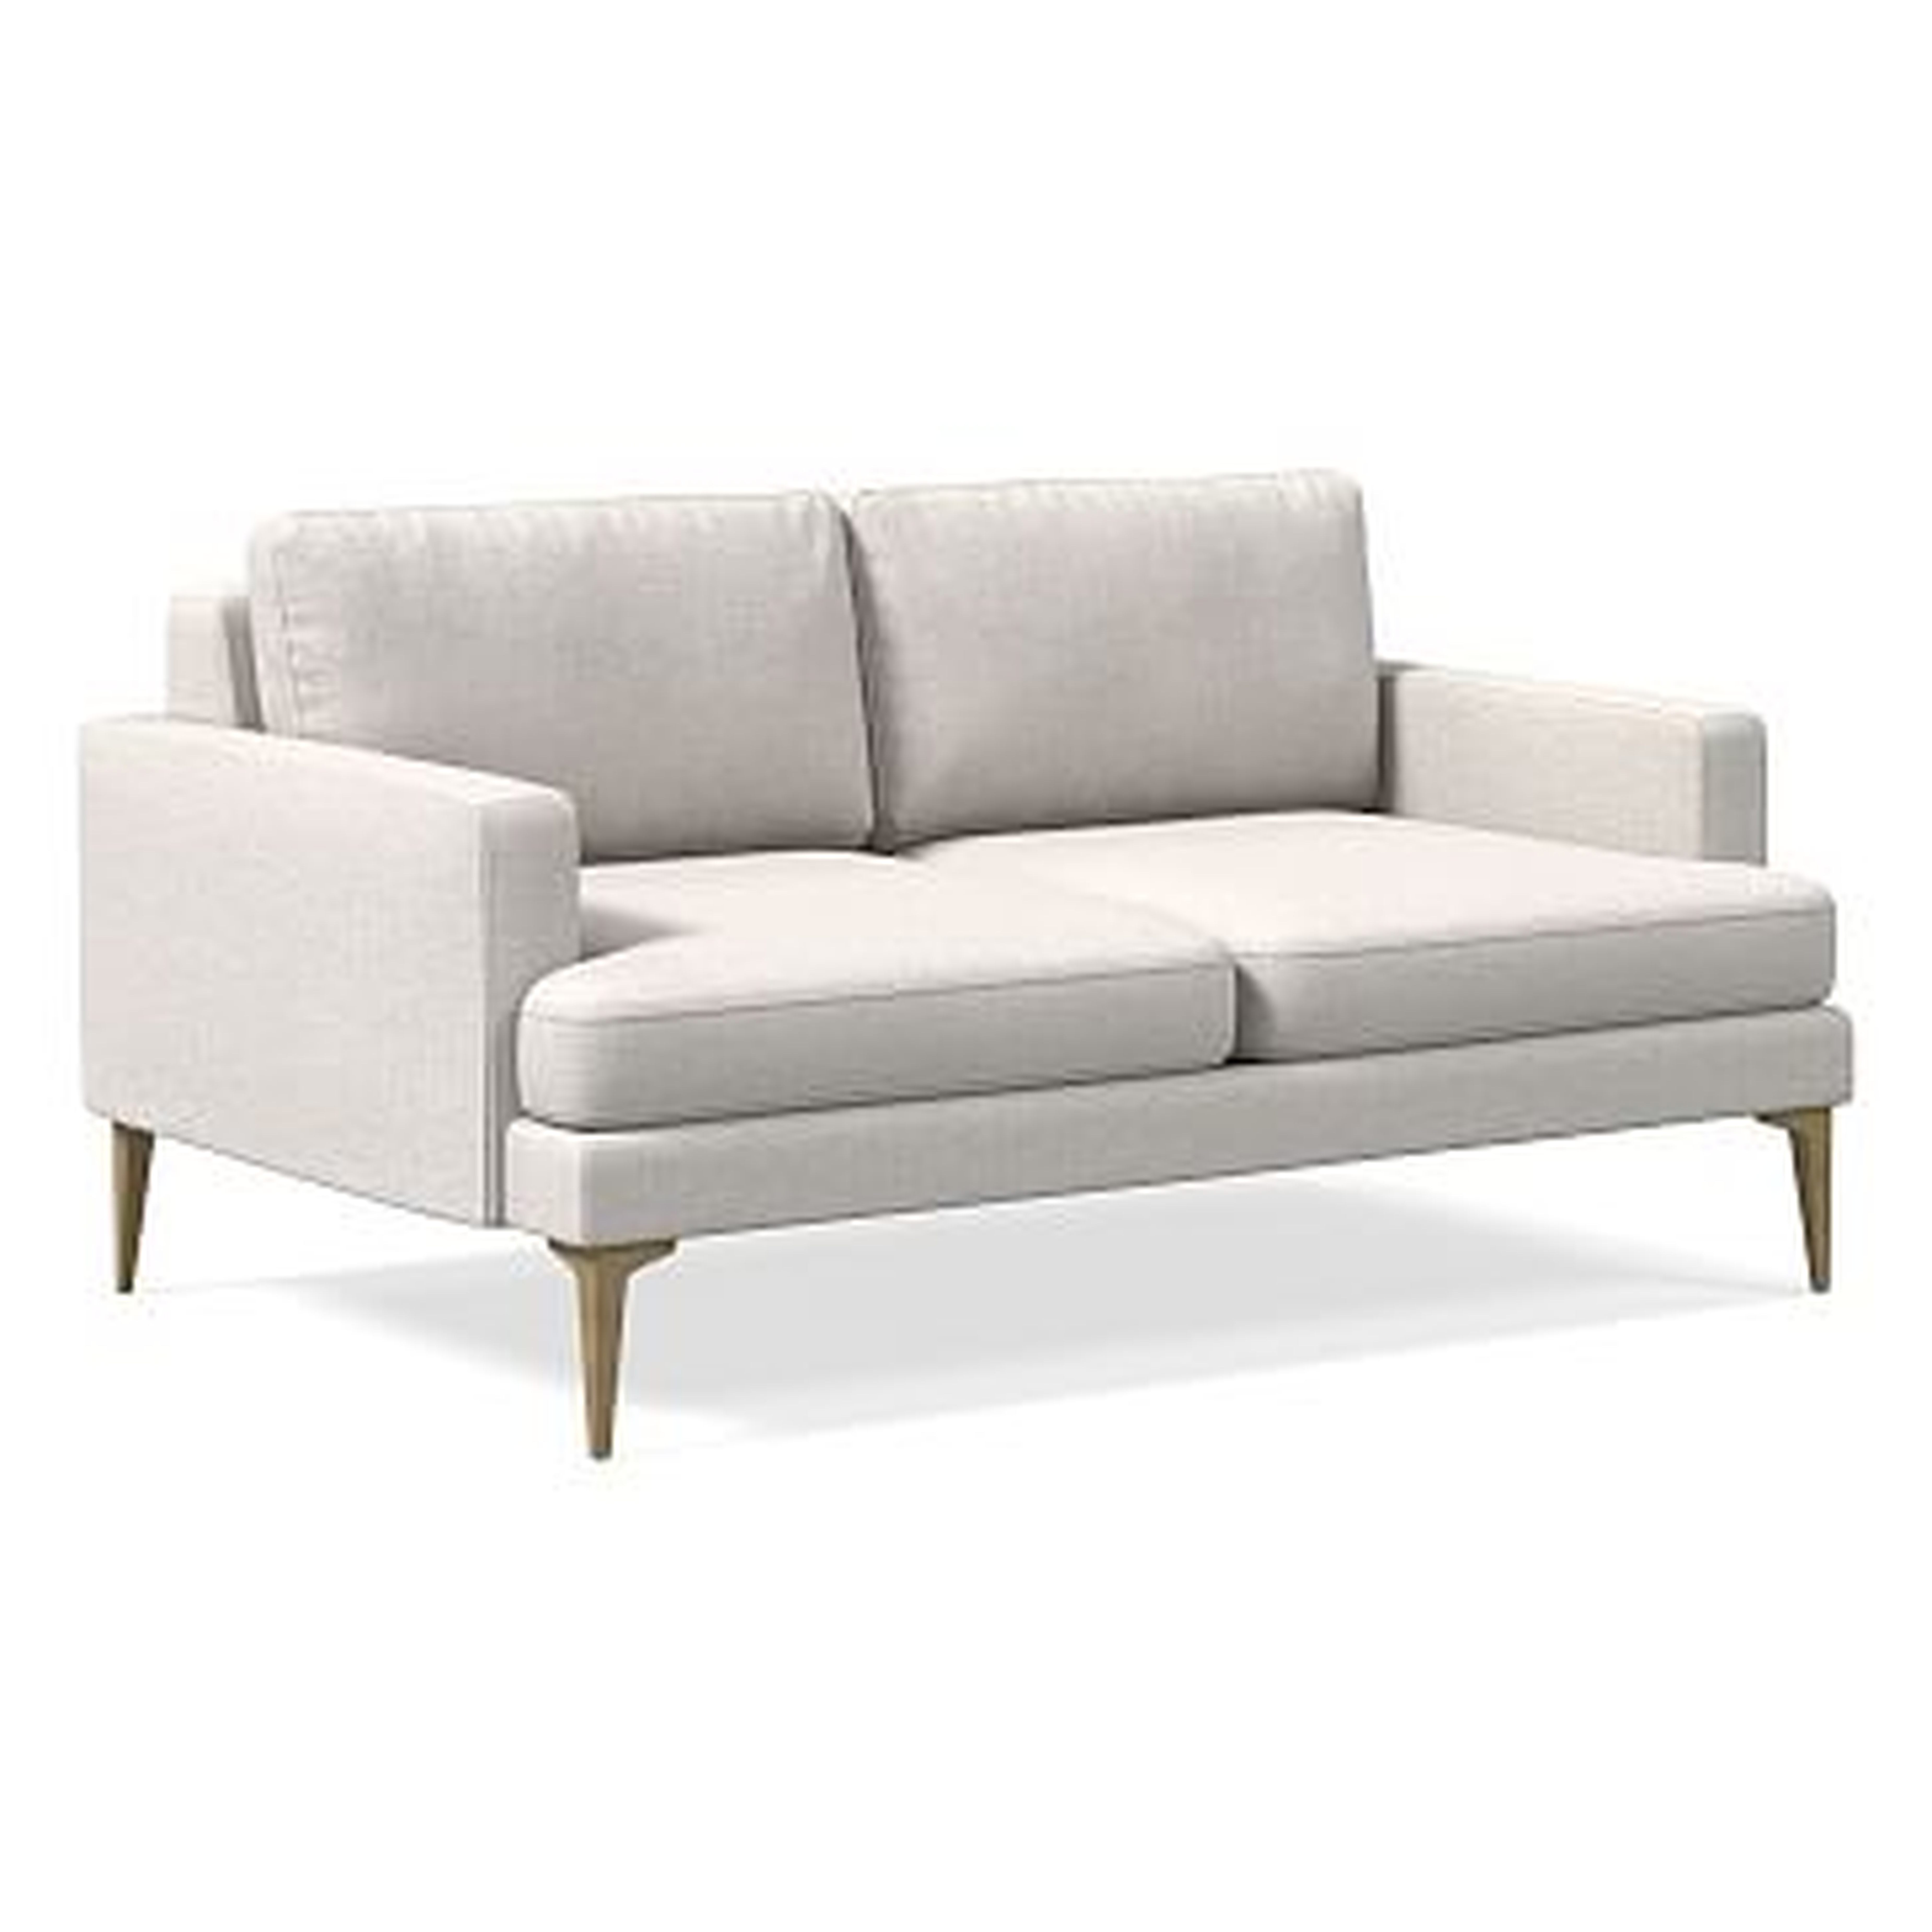 Andes Loveseat, Poly, Performance Coastal Linen, White, Blackened Brass - West Elm